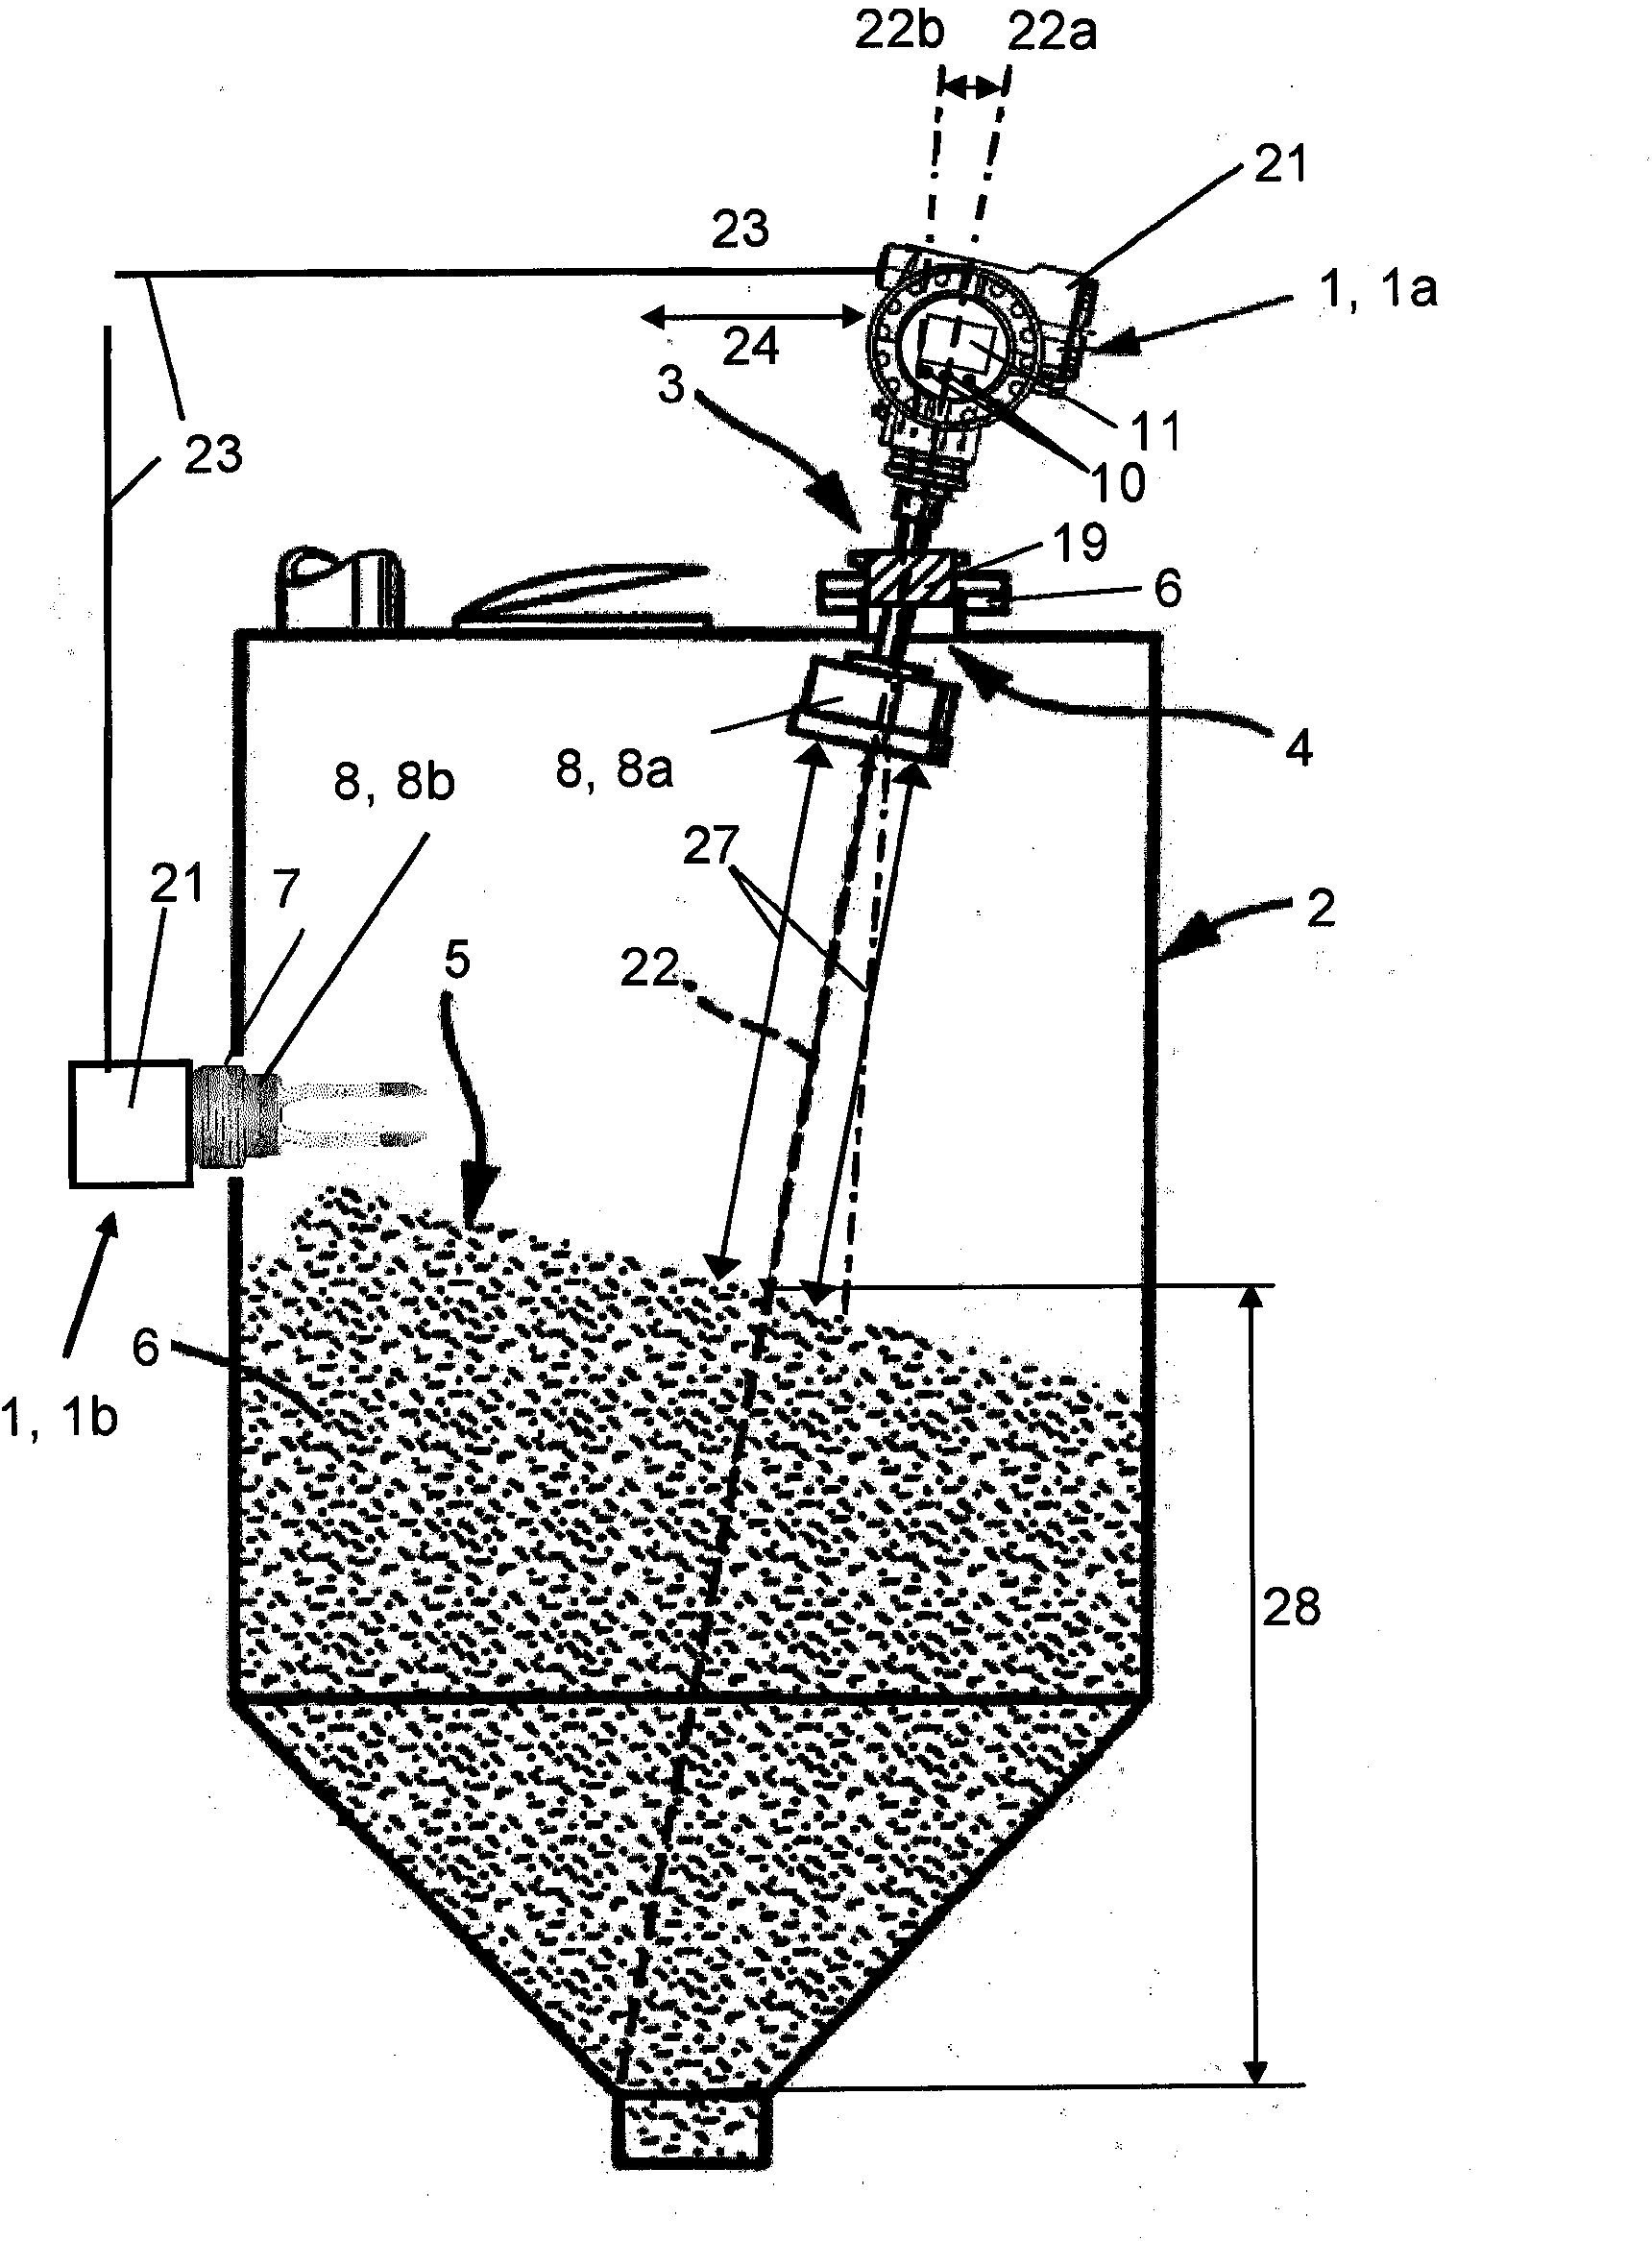 Method and apparatus for orienting measuring instrument